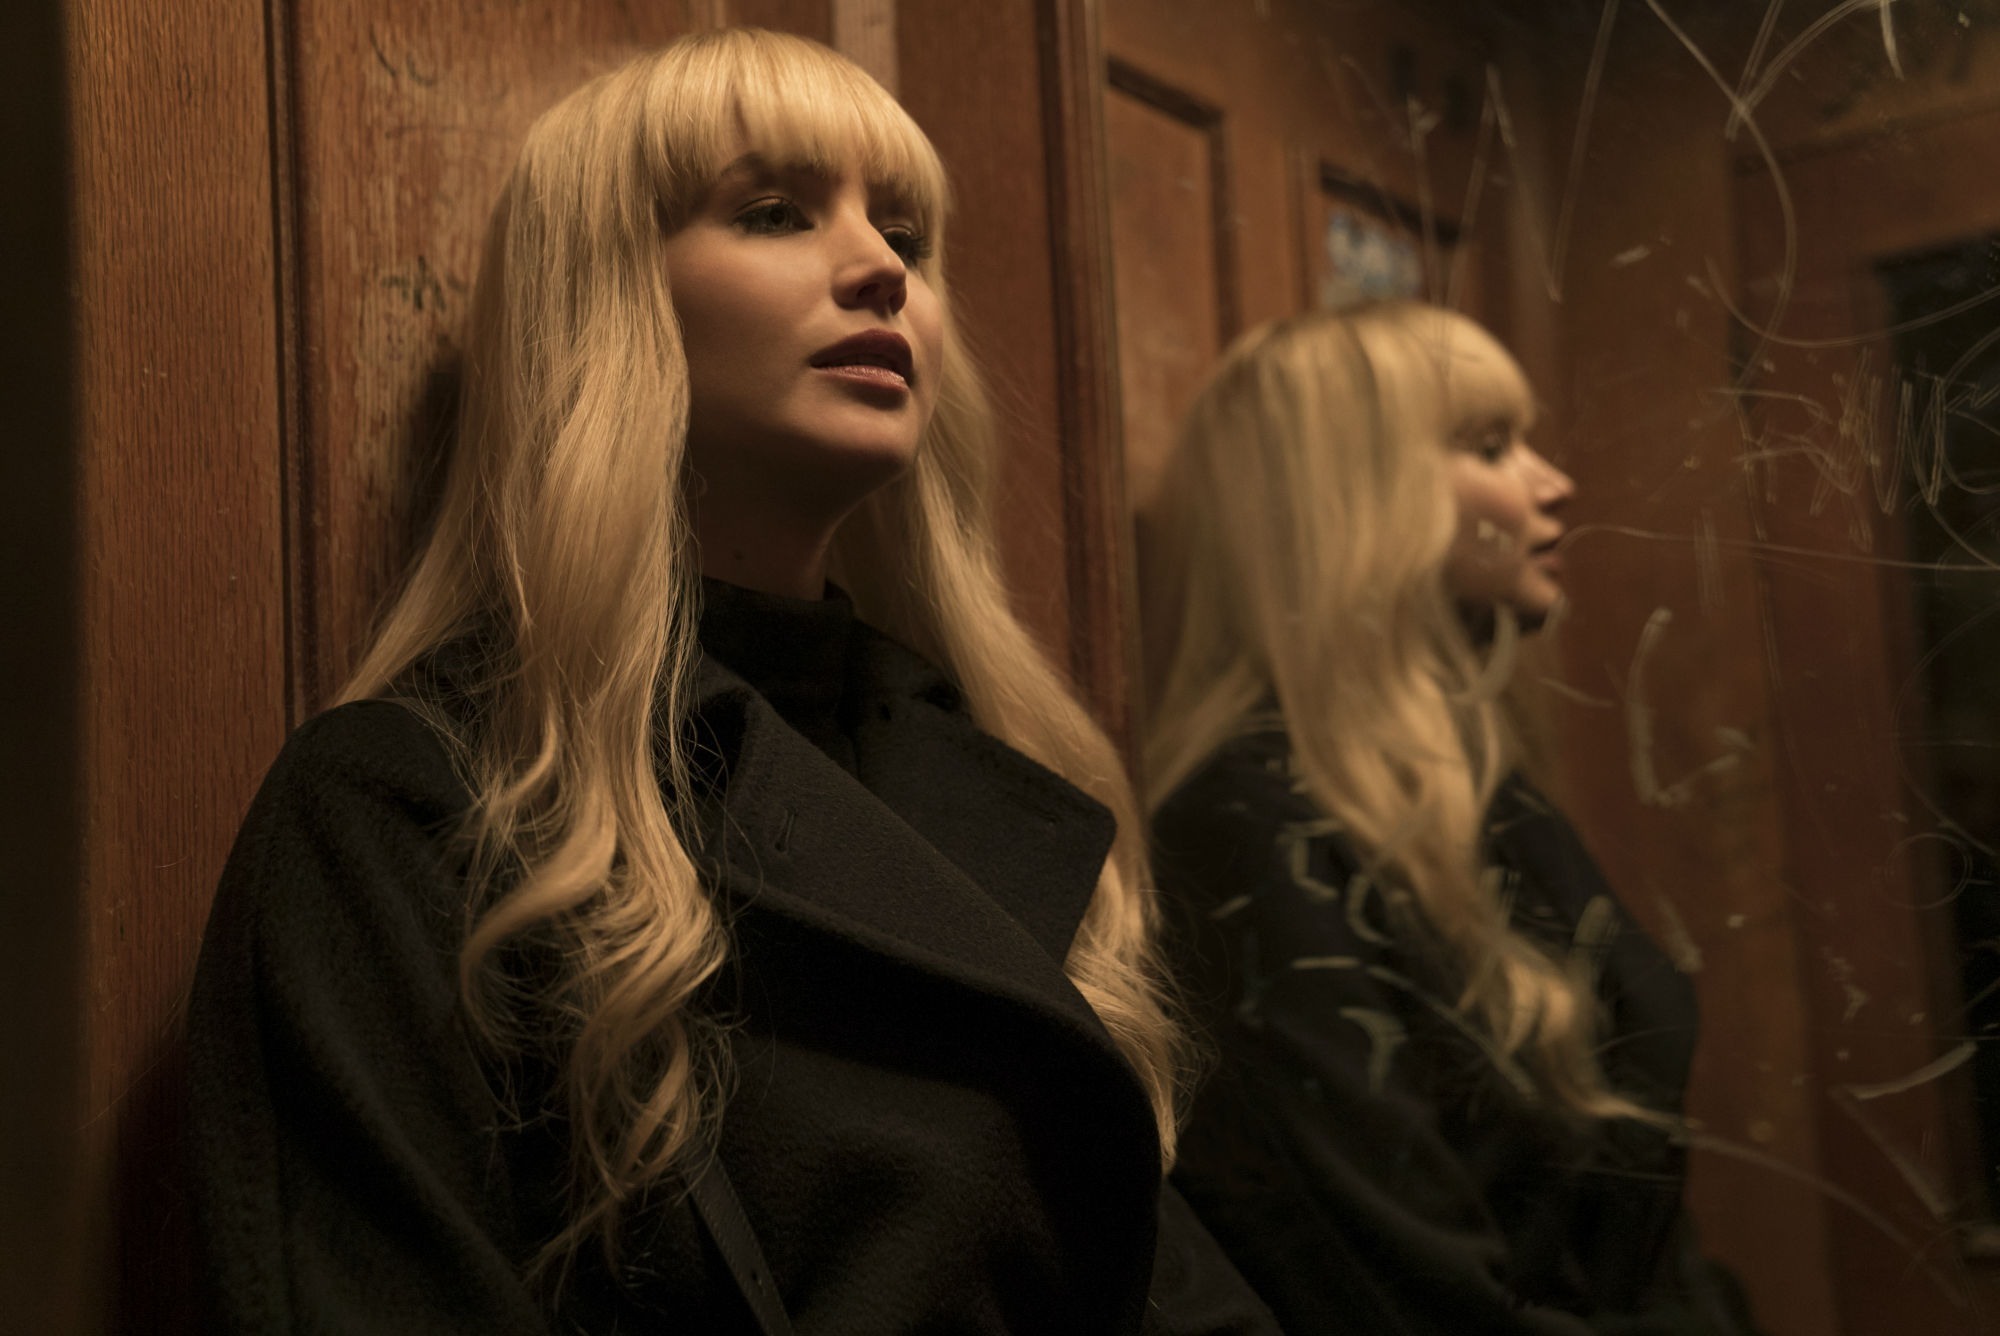 Jennifer Lawrence stars in Red Sparrow as Dominika Egorova, a former prima ballerina drafted against her will to become a 